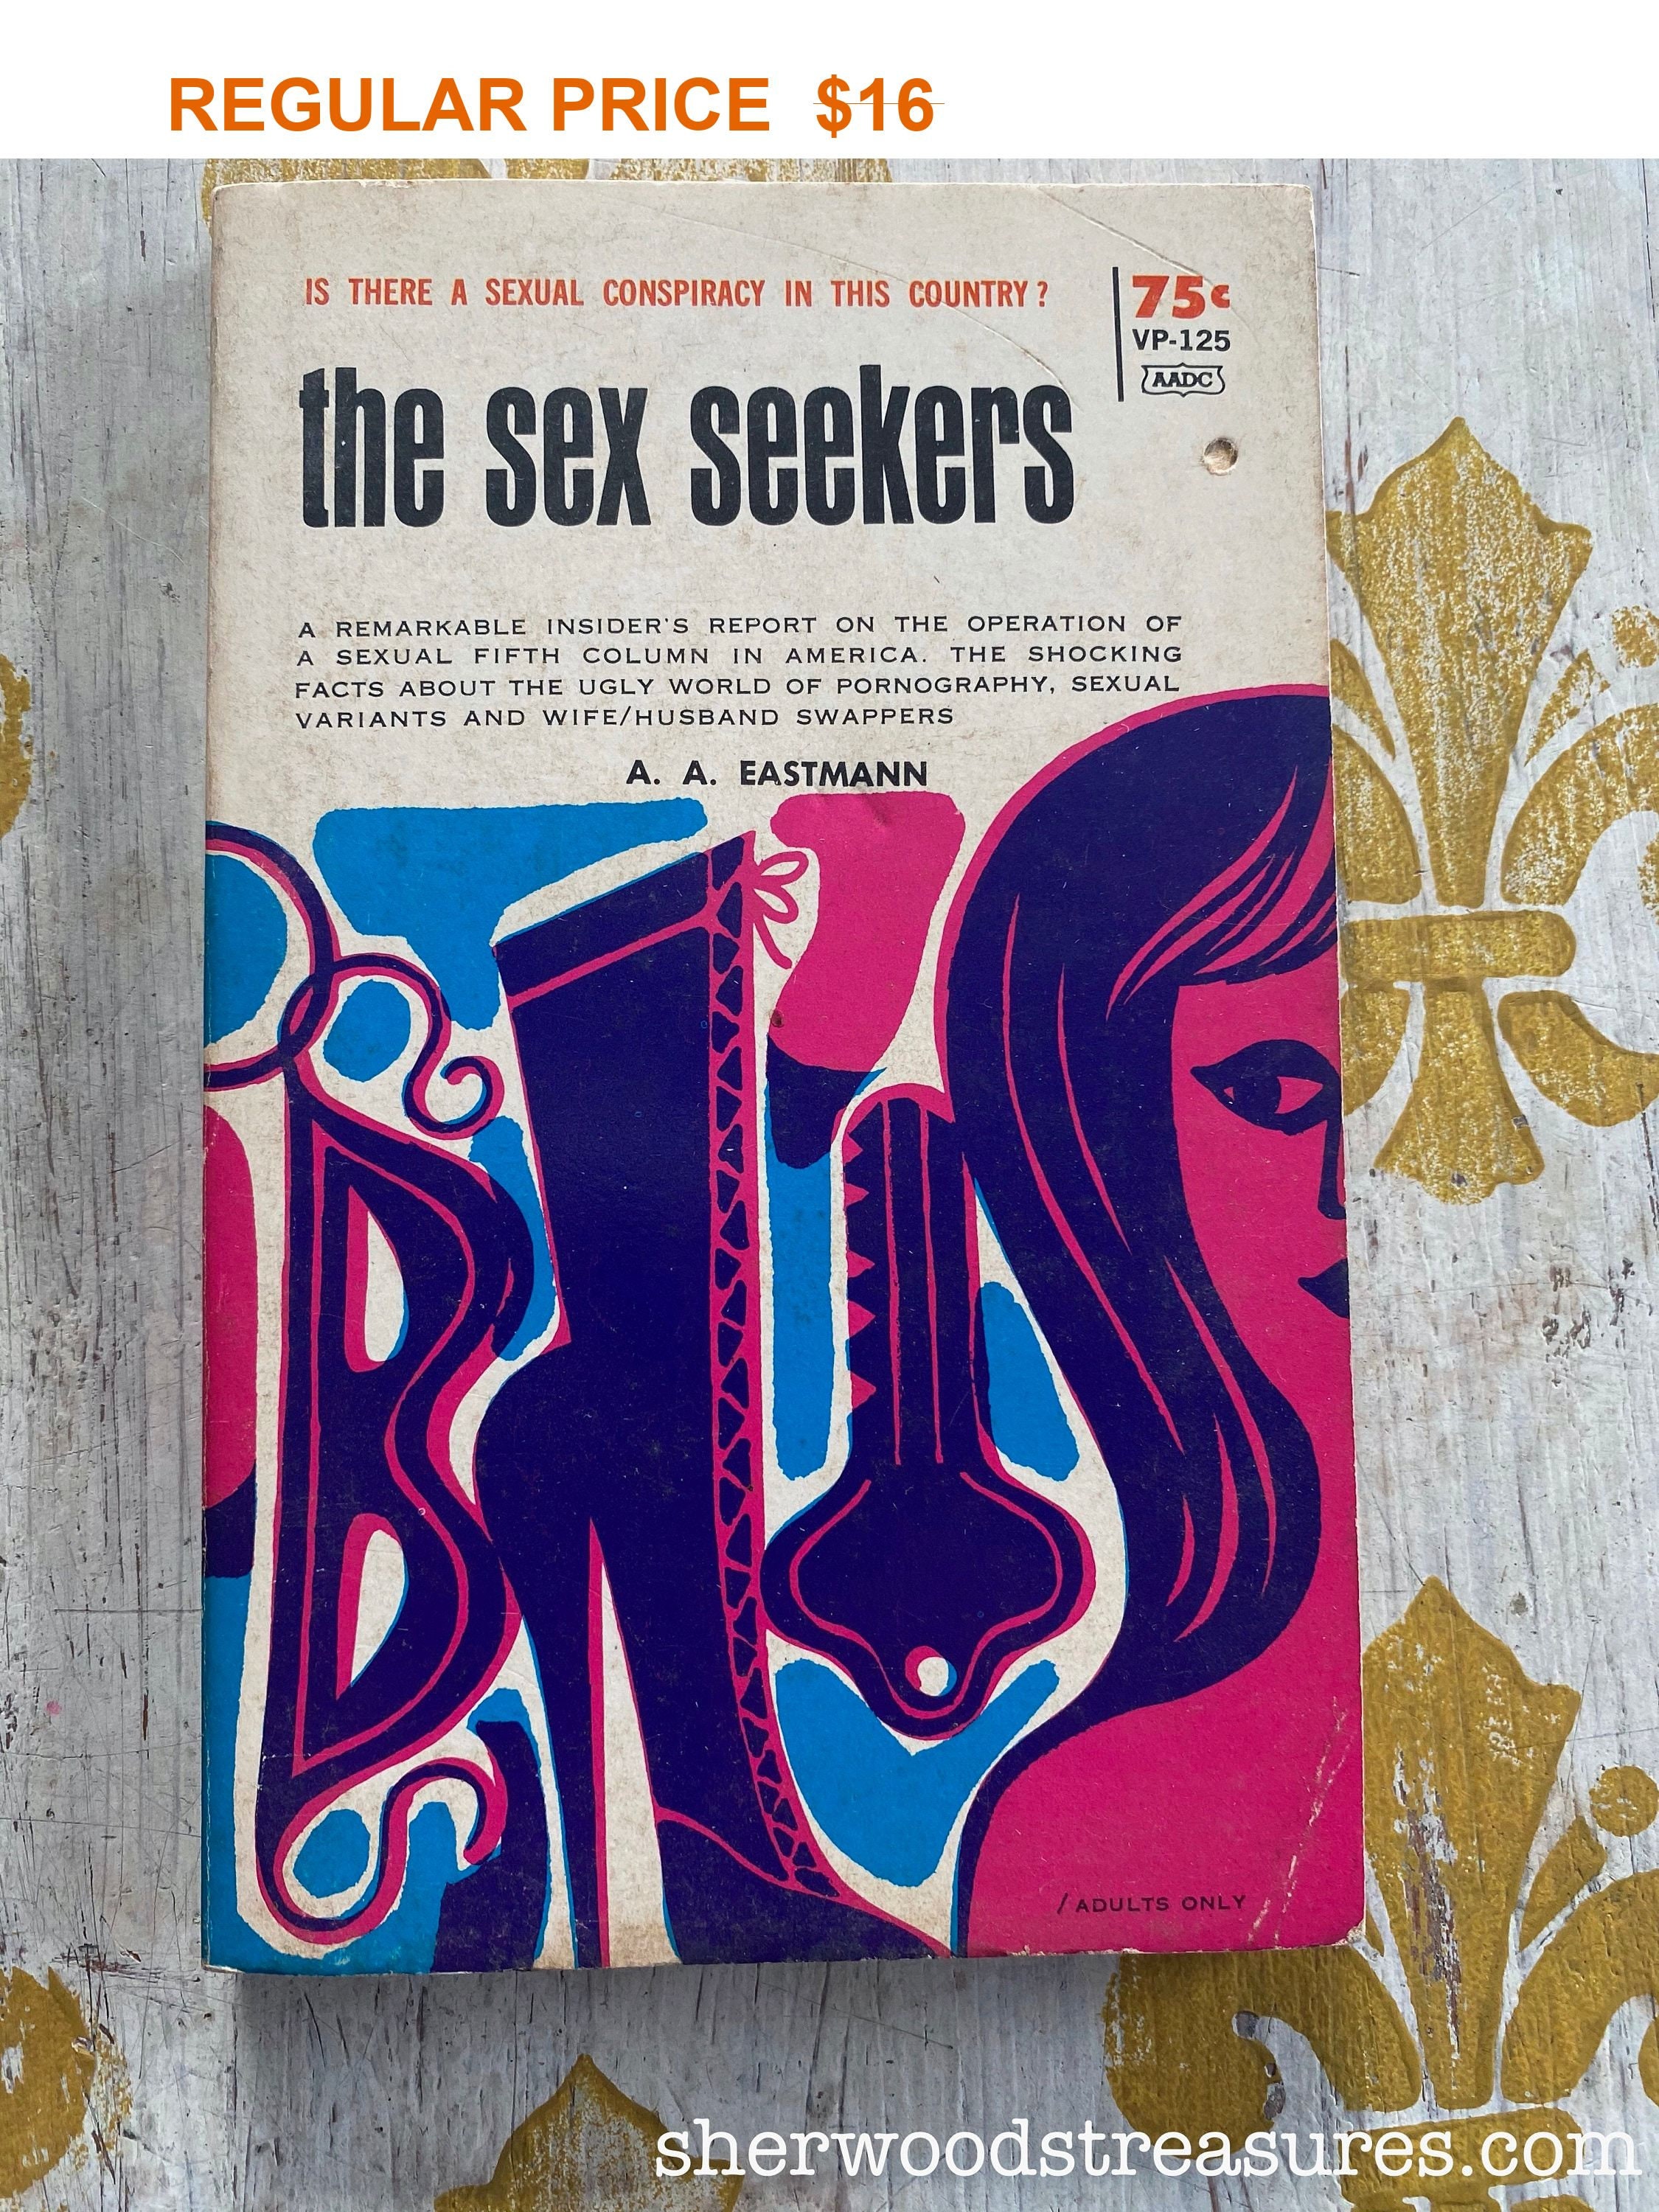 MATURE the Sex Seekers 1965 Sleaze Paperback Book A.A. Eastman - Etsy Israel